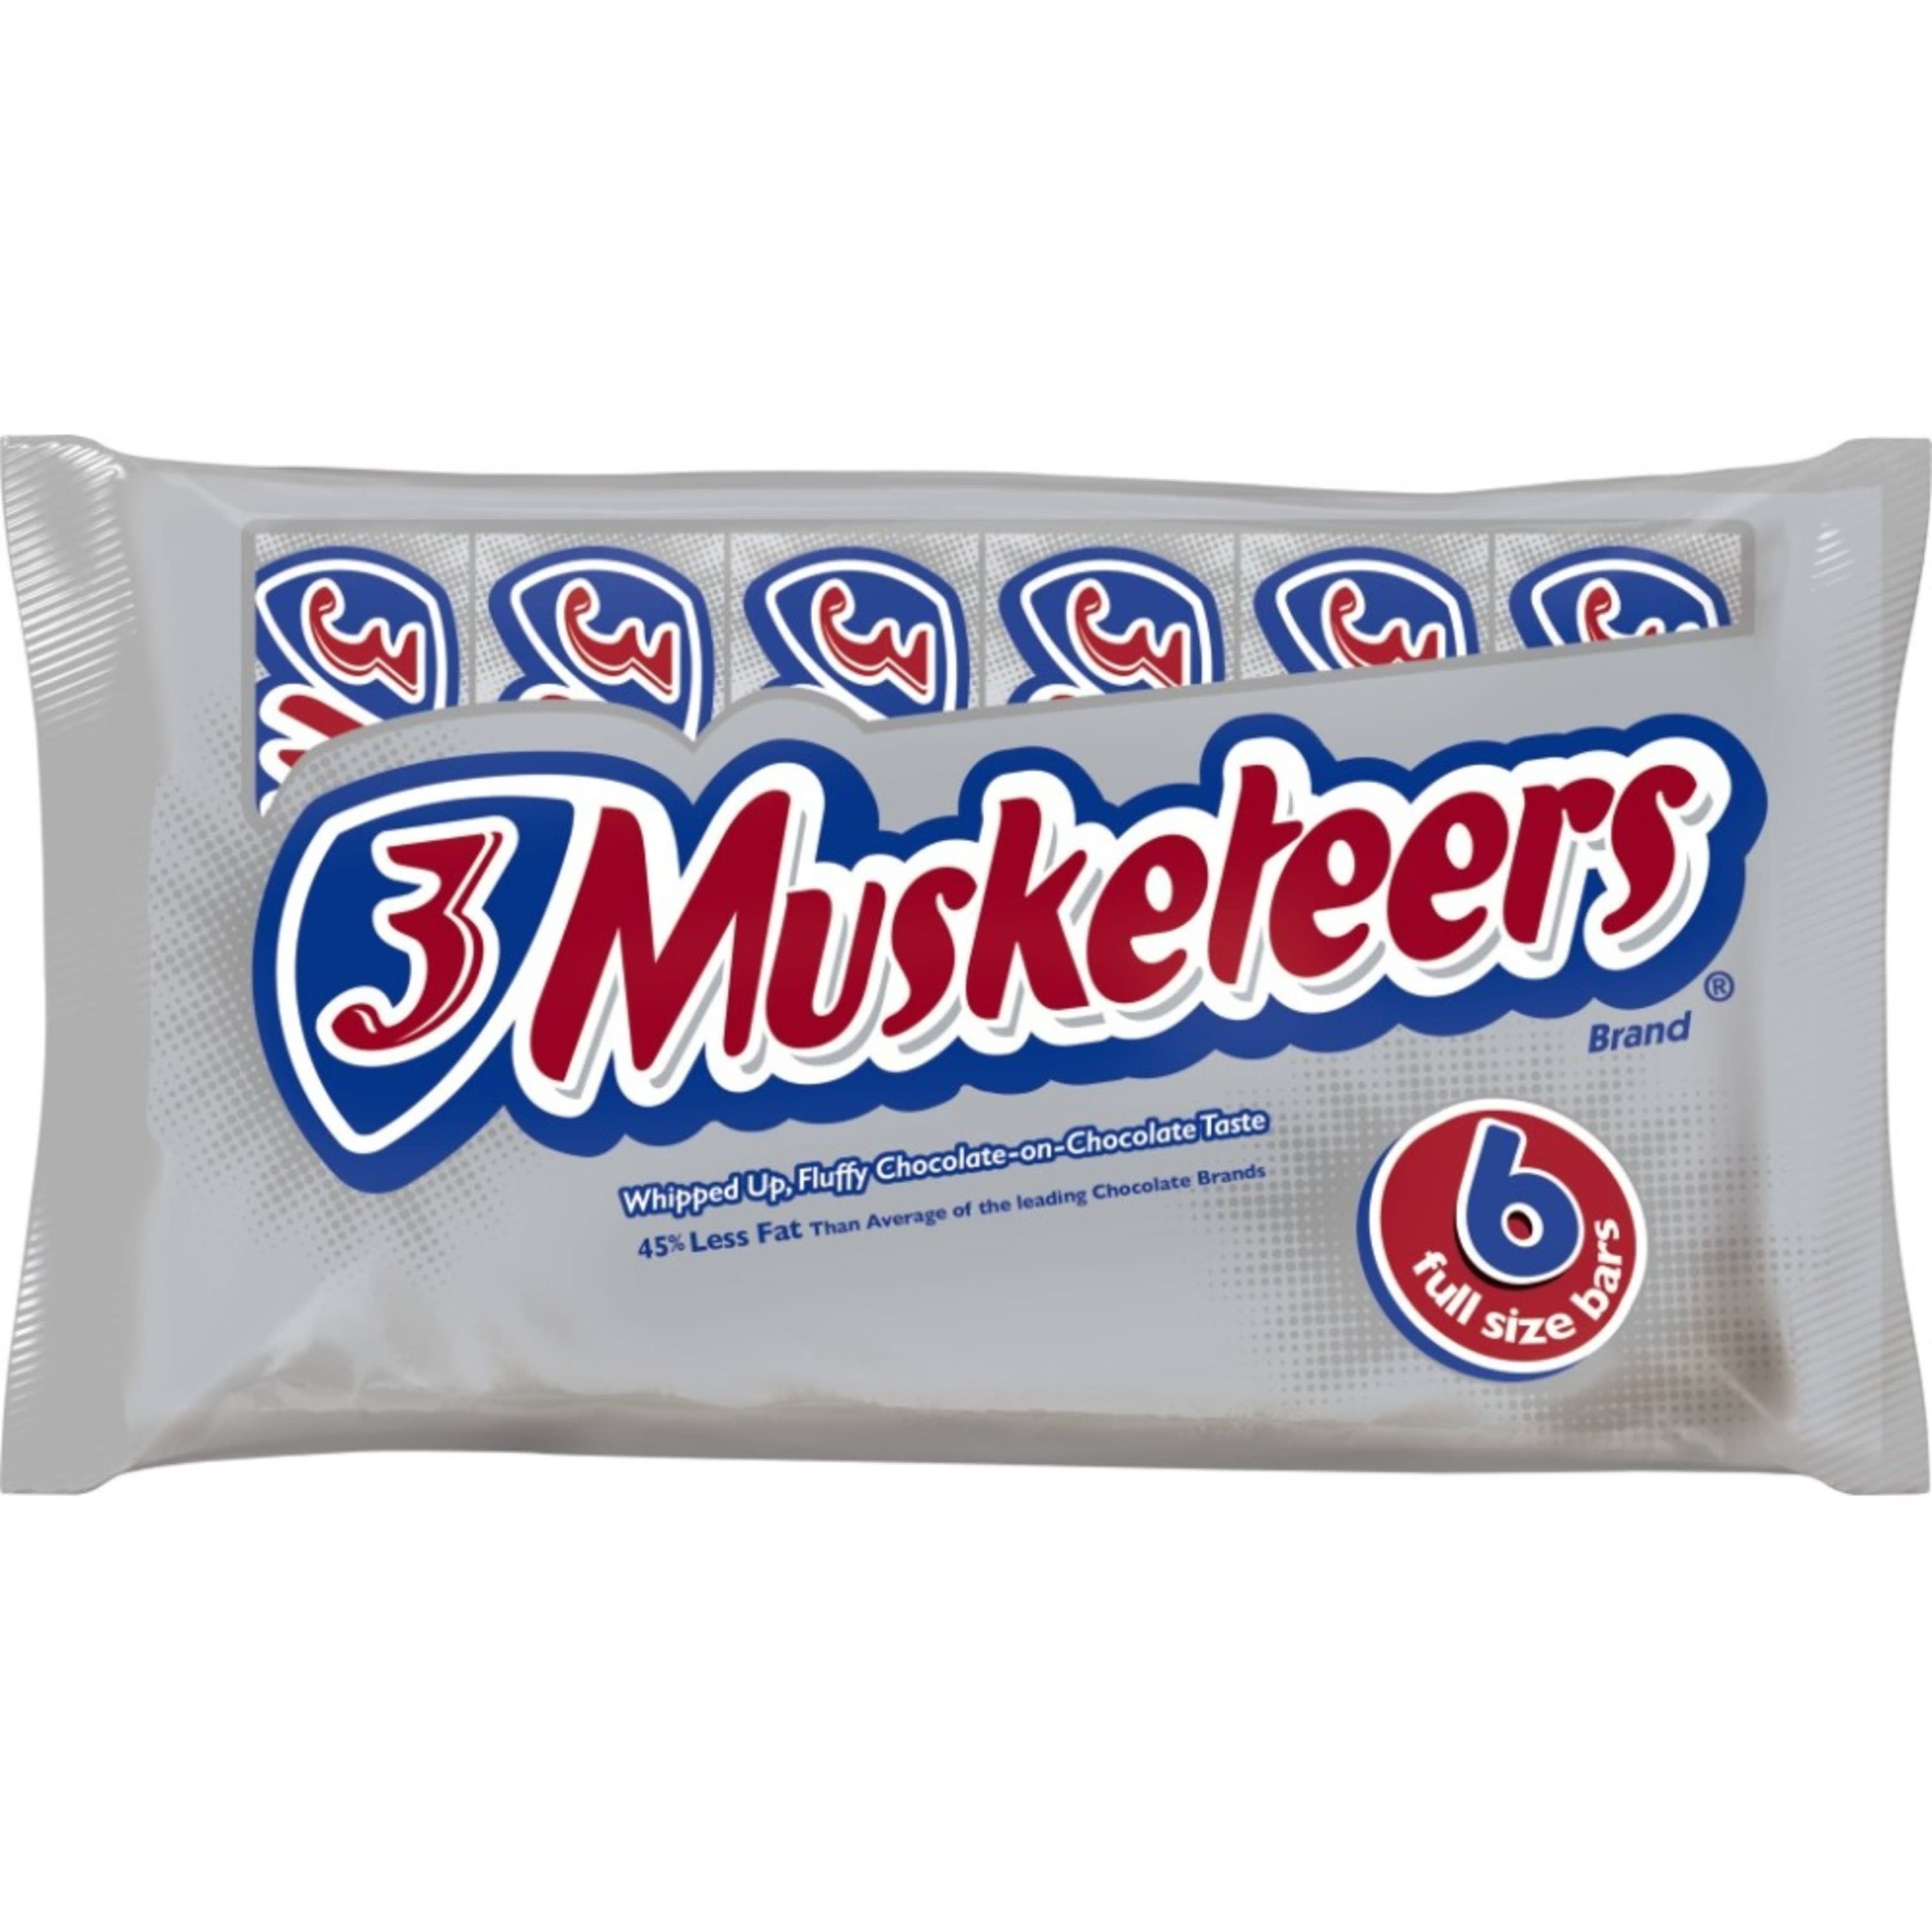  3 MUSKETEERS Candy Milk Chocolate Bars, Full Size, 1.92 oz Bar  (Pack of 36) Box : Chocolate Bars : Grocery & Gourmet Food